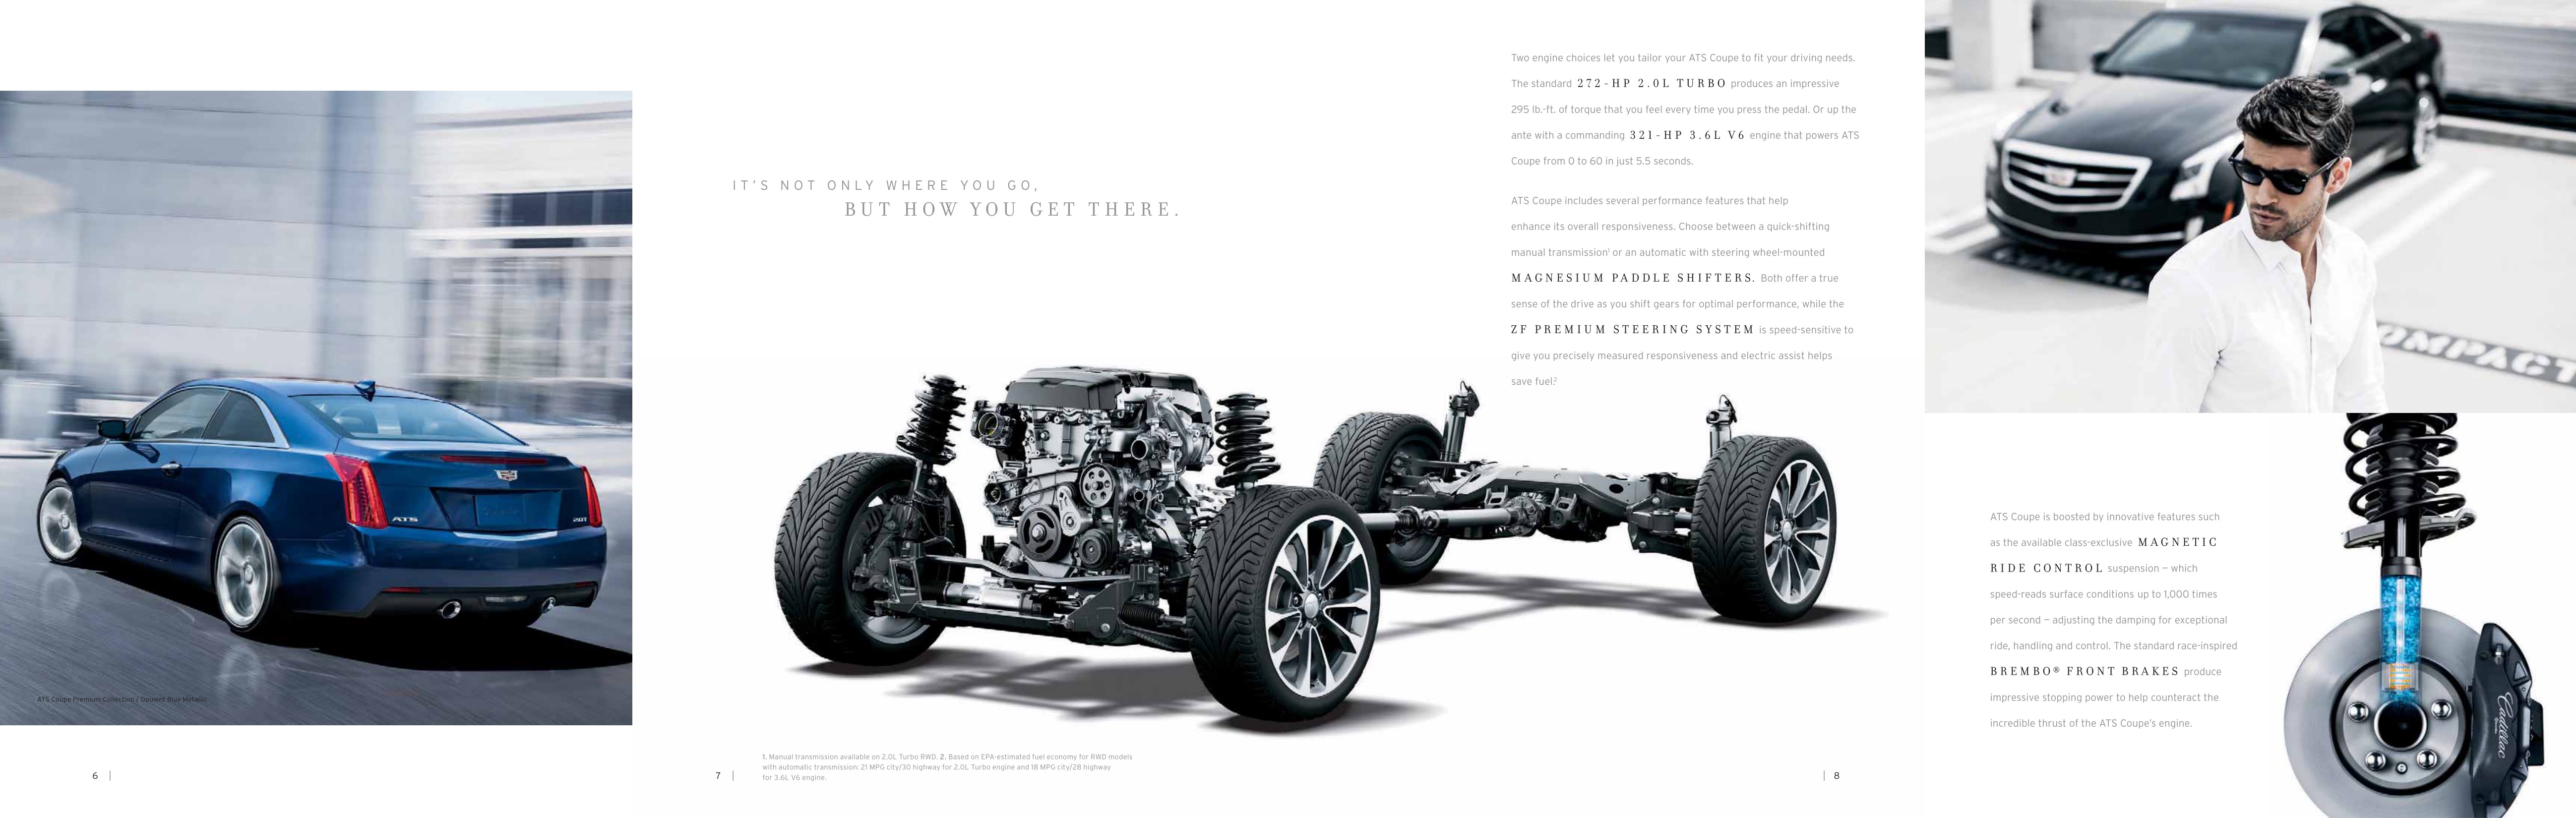 2015 Cadillac ATS Coupe Brochure Page 5